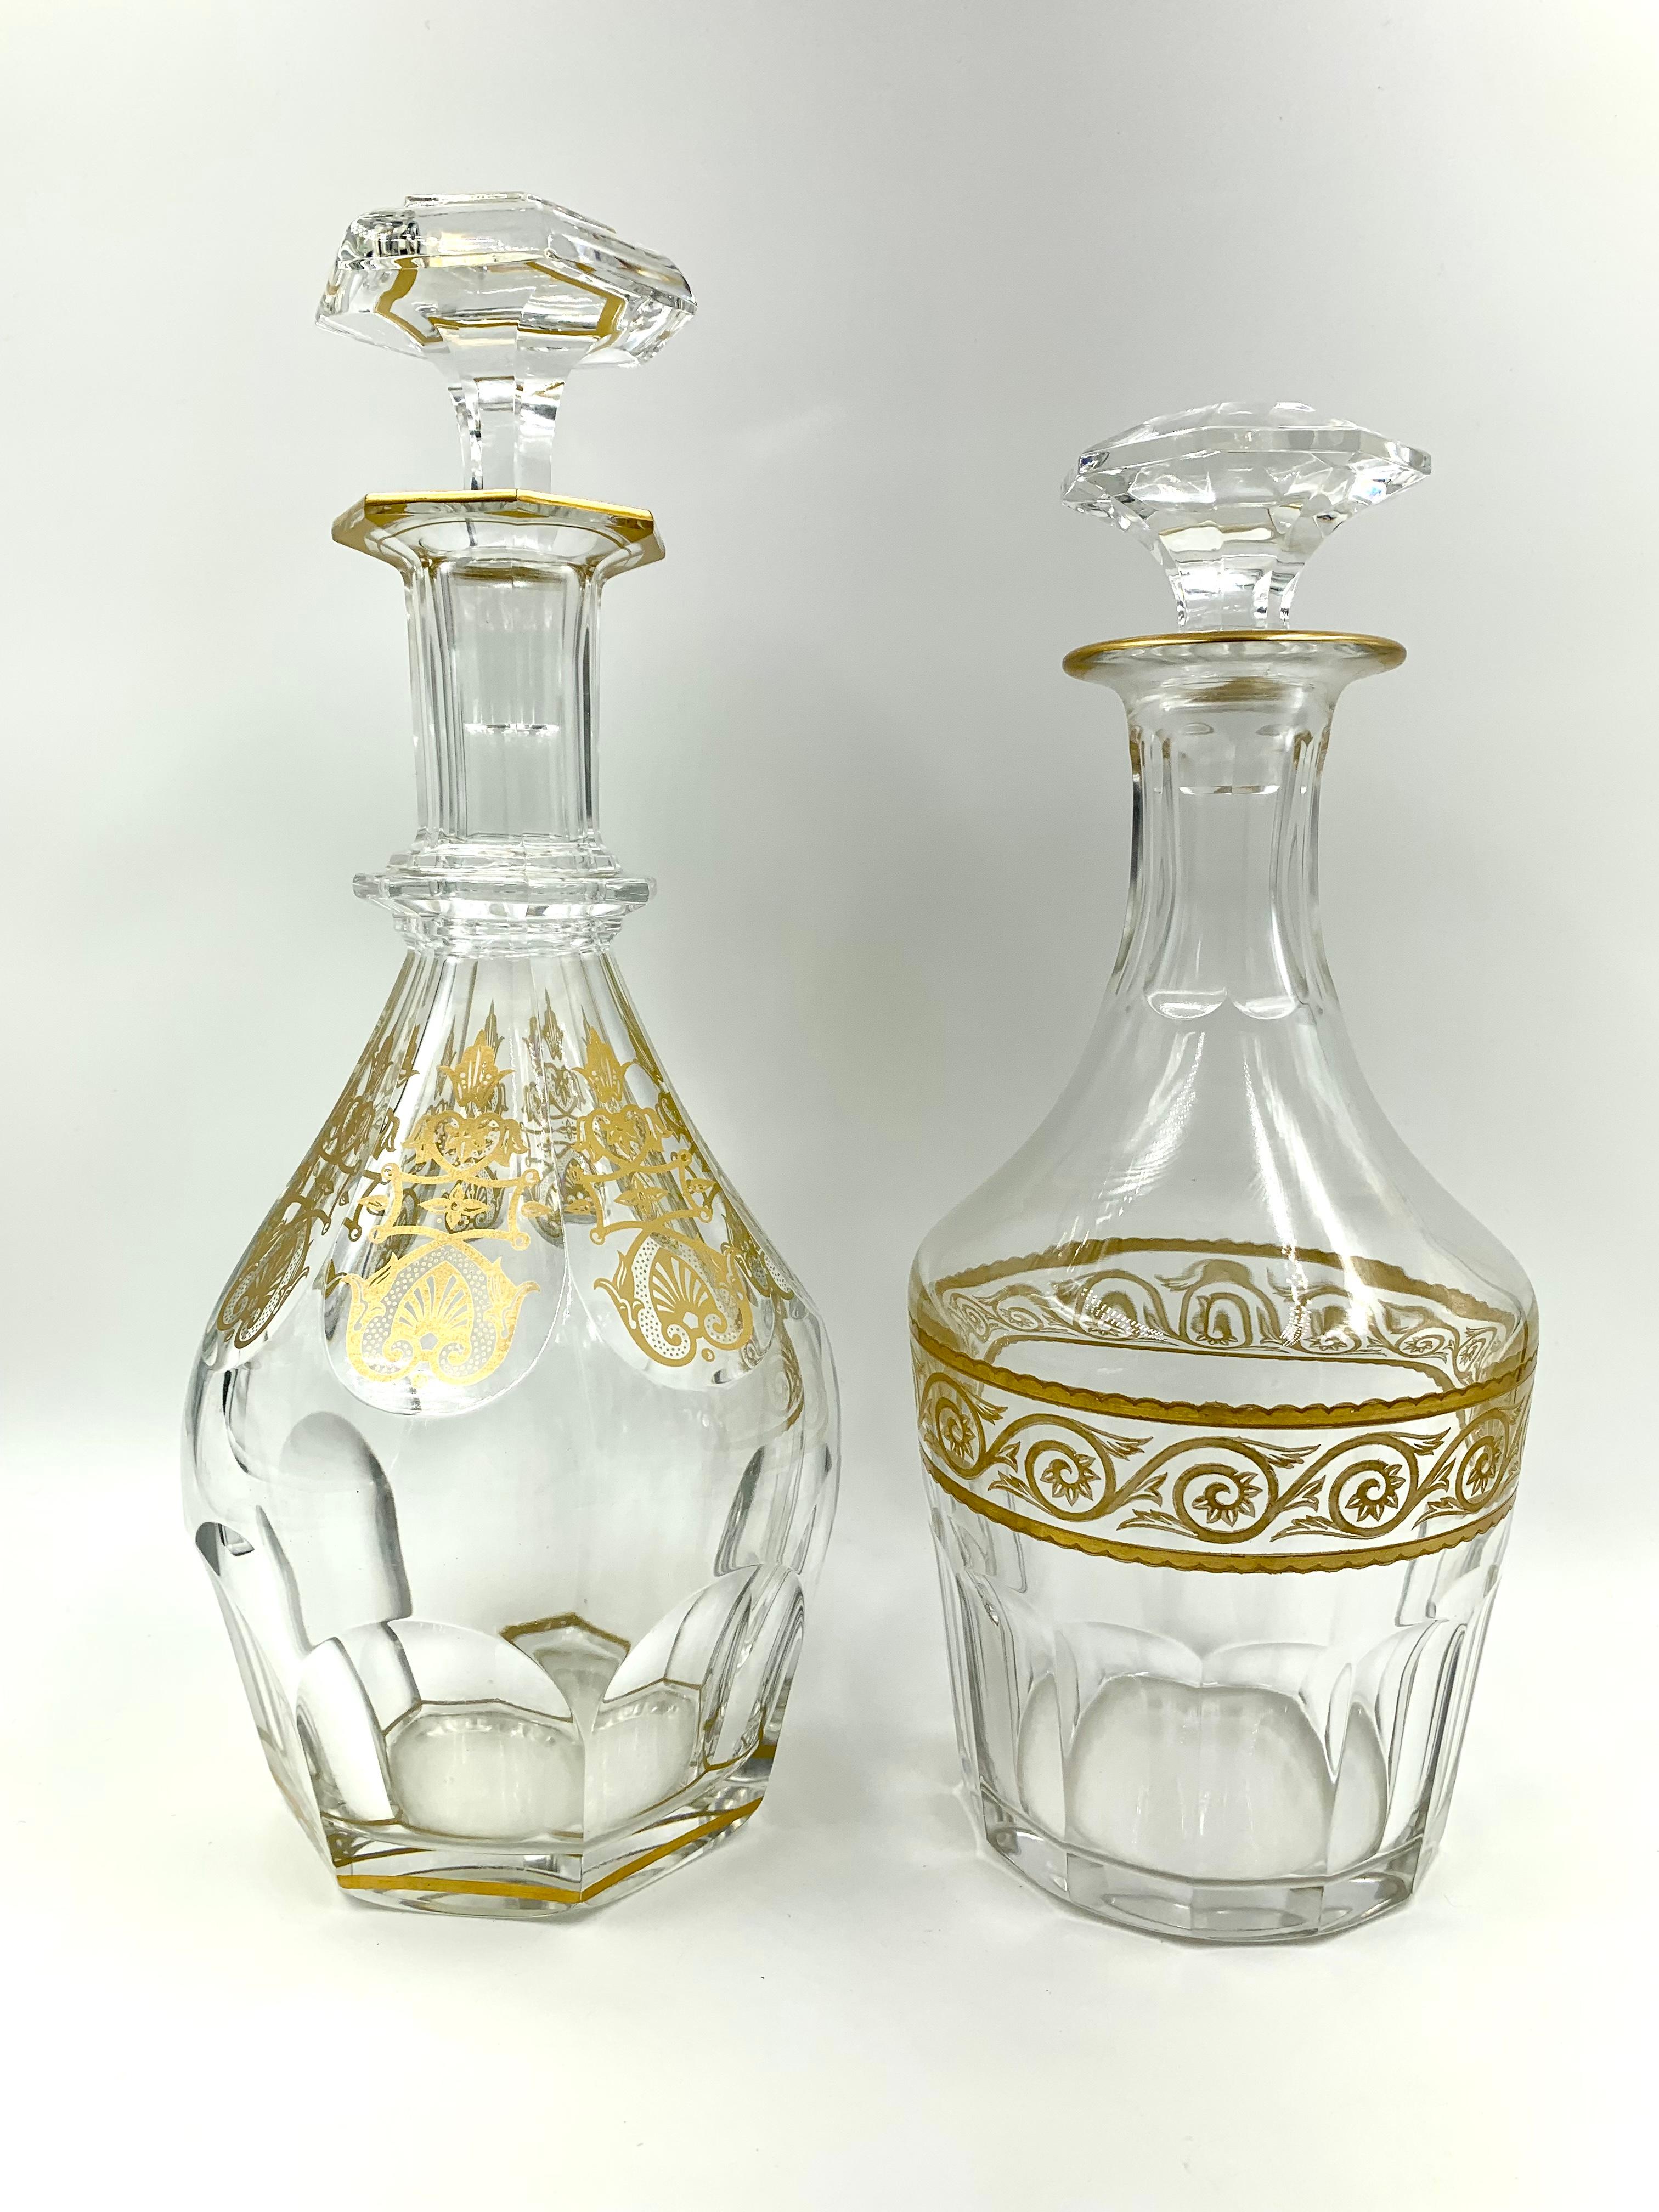 Rare Estate Baccarat Eldorado Neoclassical Style Crystal and Gold Decanter For Sale 3